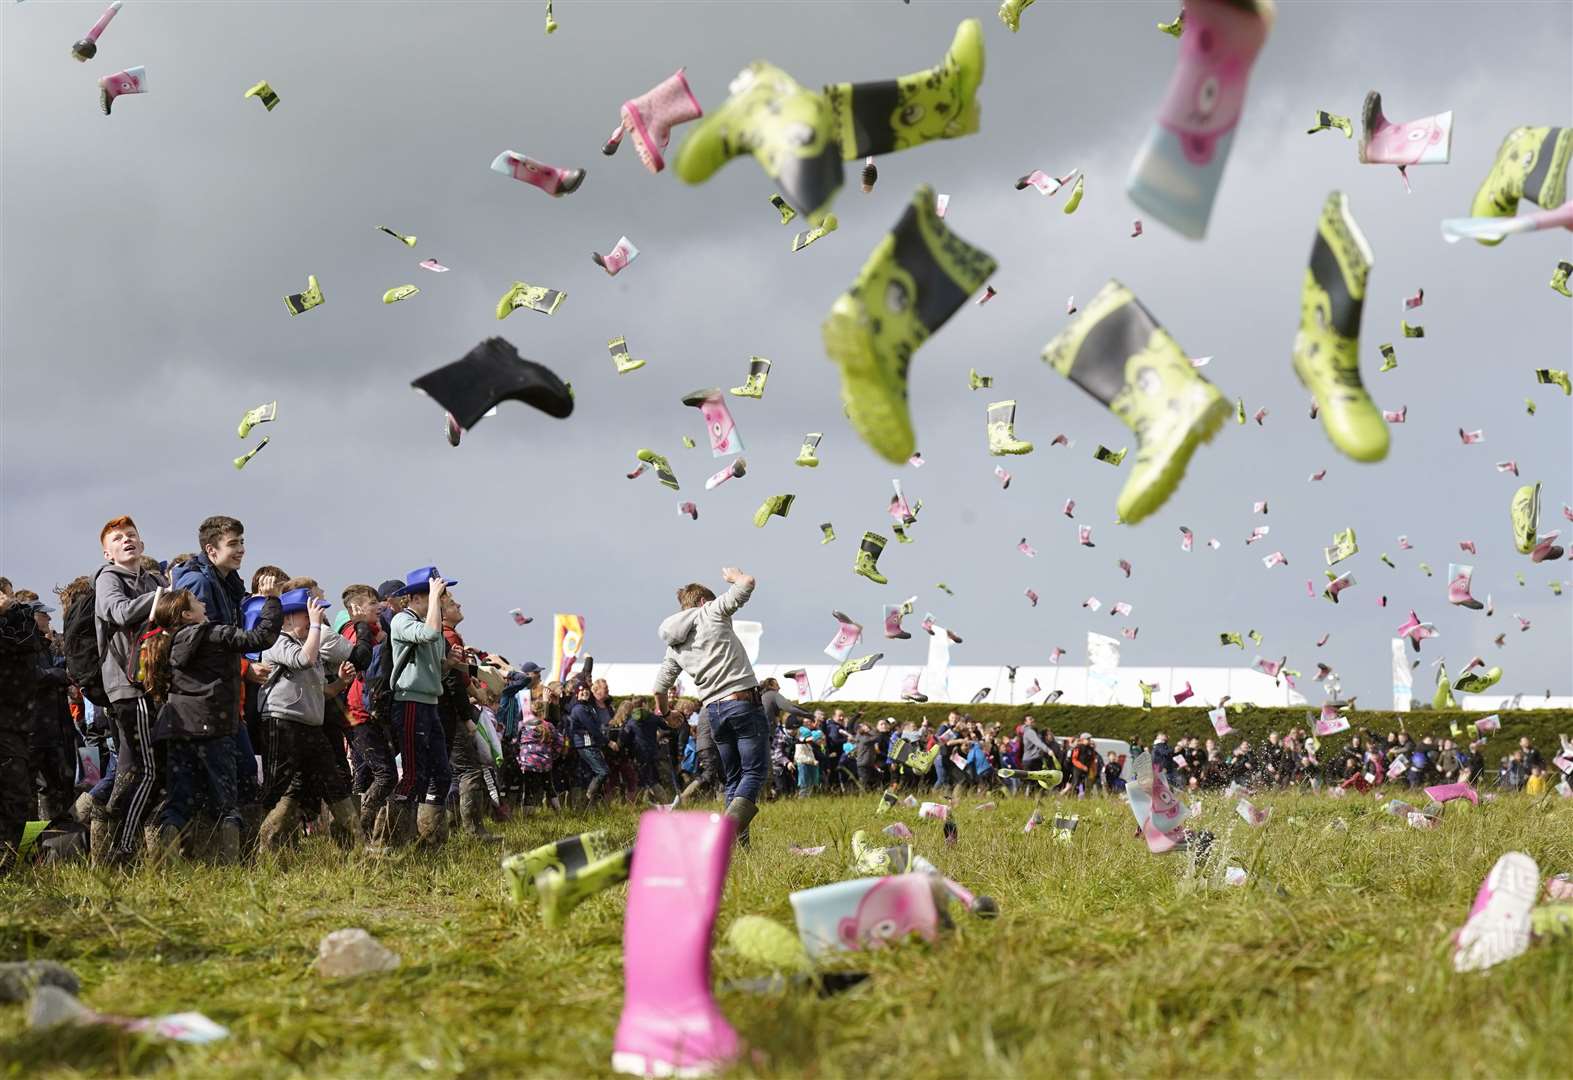 Some 995 people take part in a world record bid – the most people throwing wellies – at the National Ploughing Championships in Co Laois in September (PA)